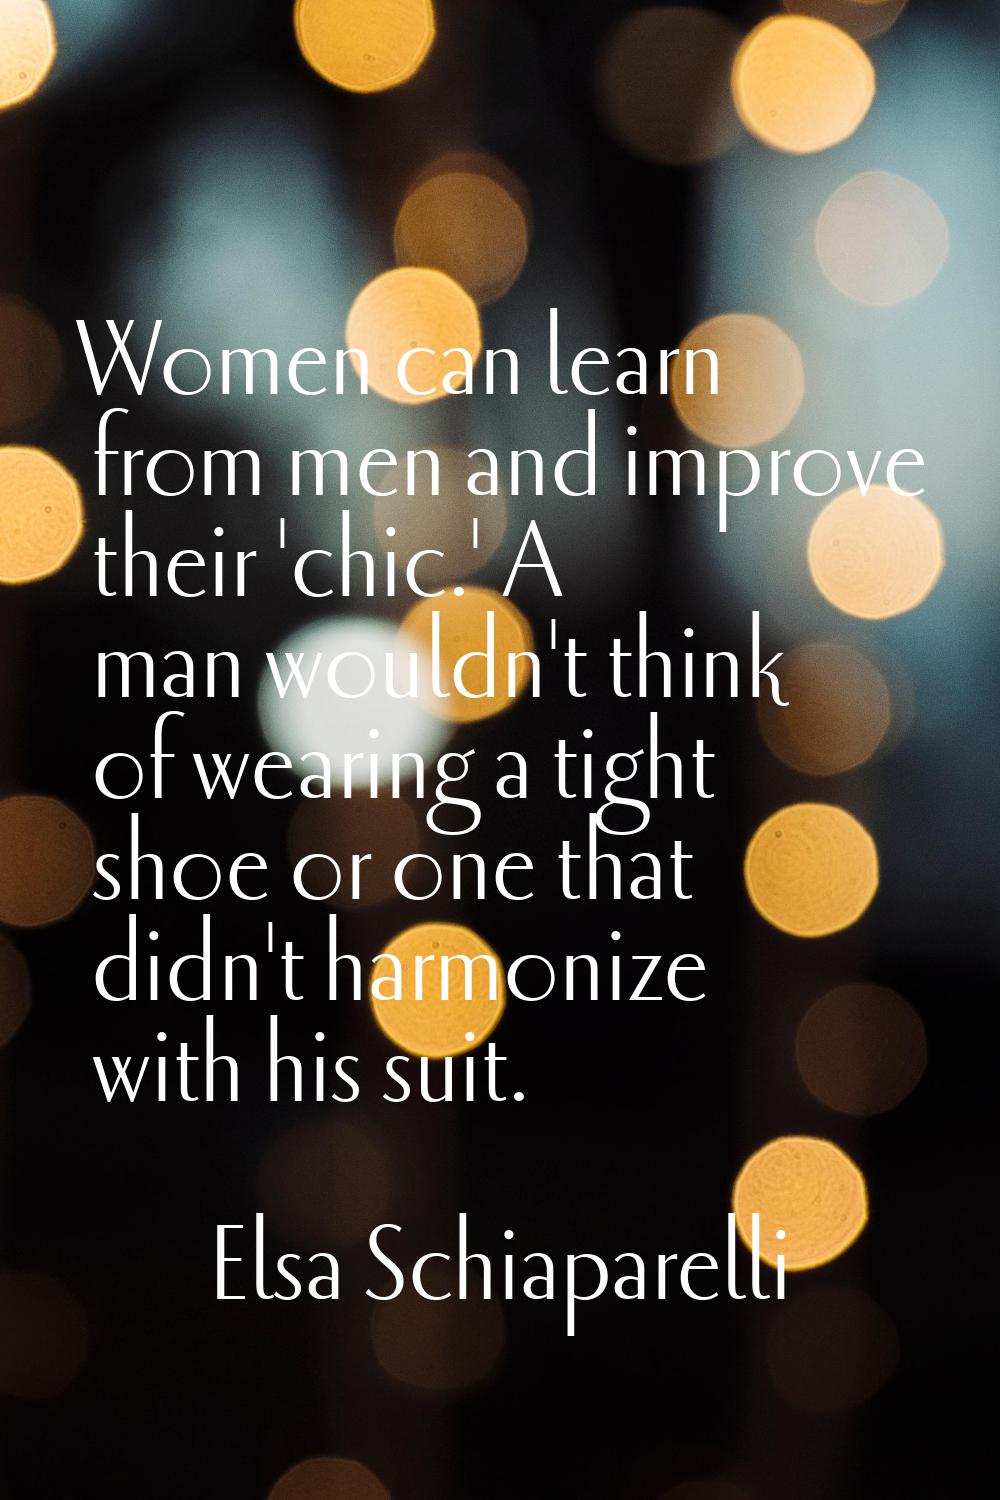 Women can learn from men and improve their 'chic.' A man wouldn't think of wearing a tight shoe or 